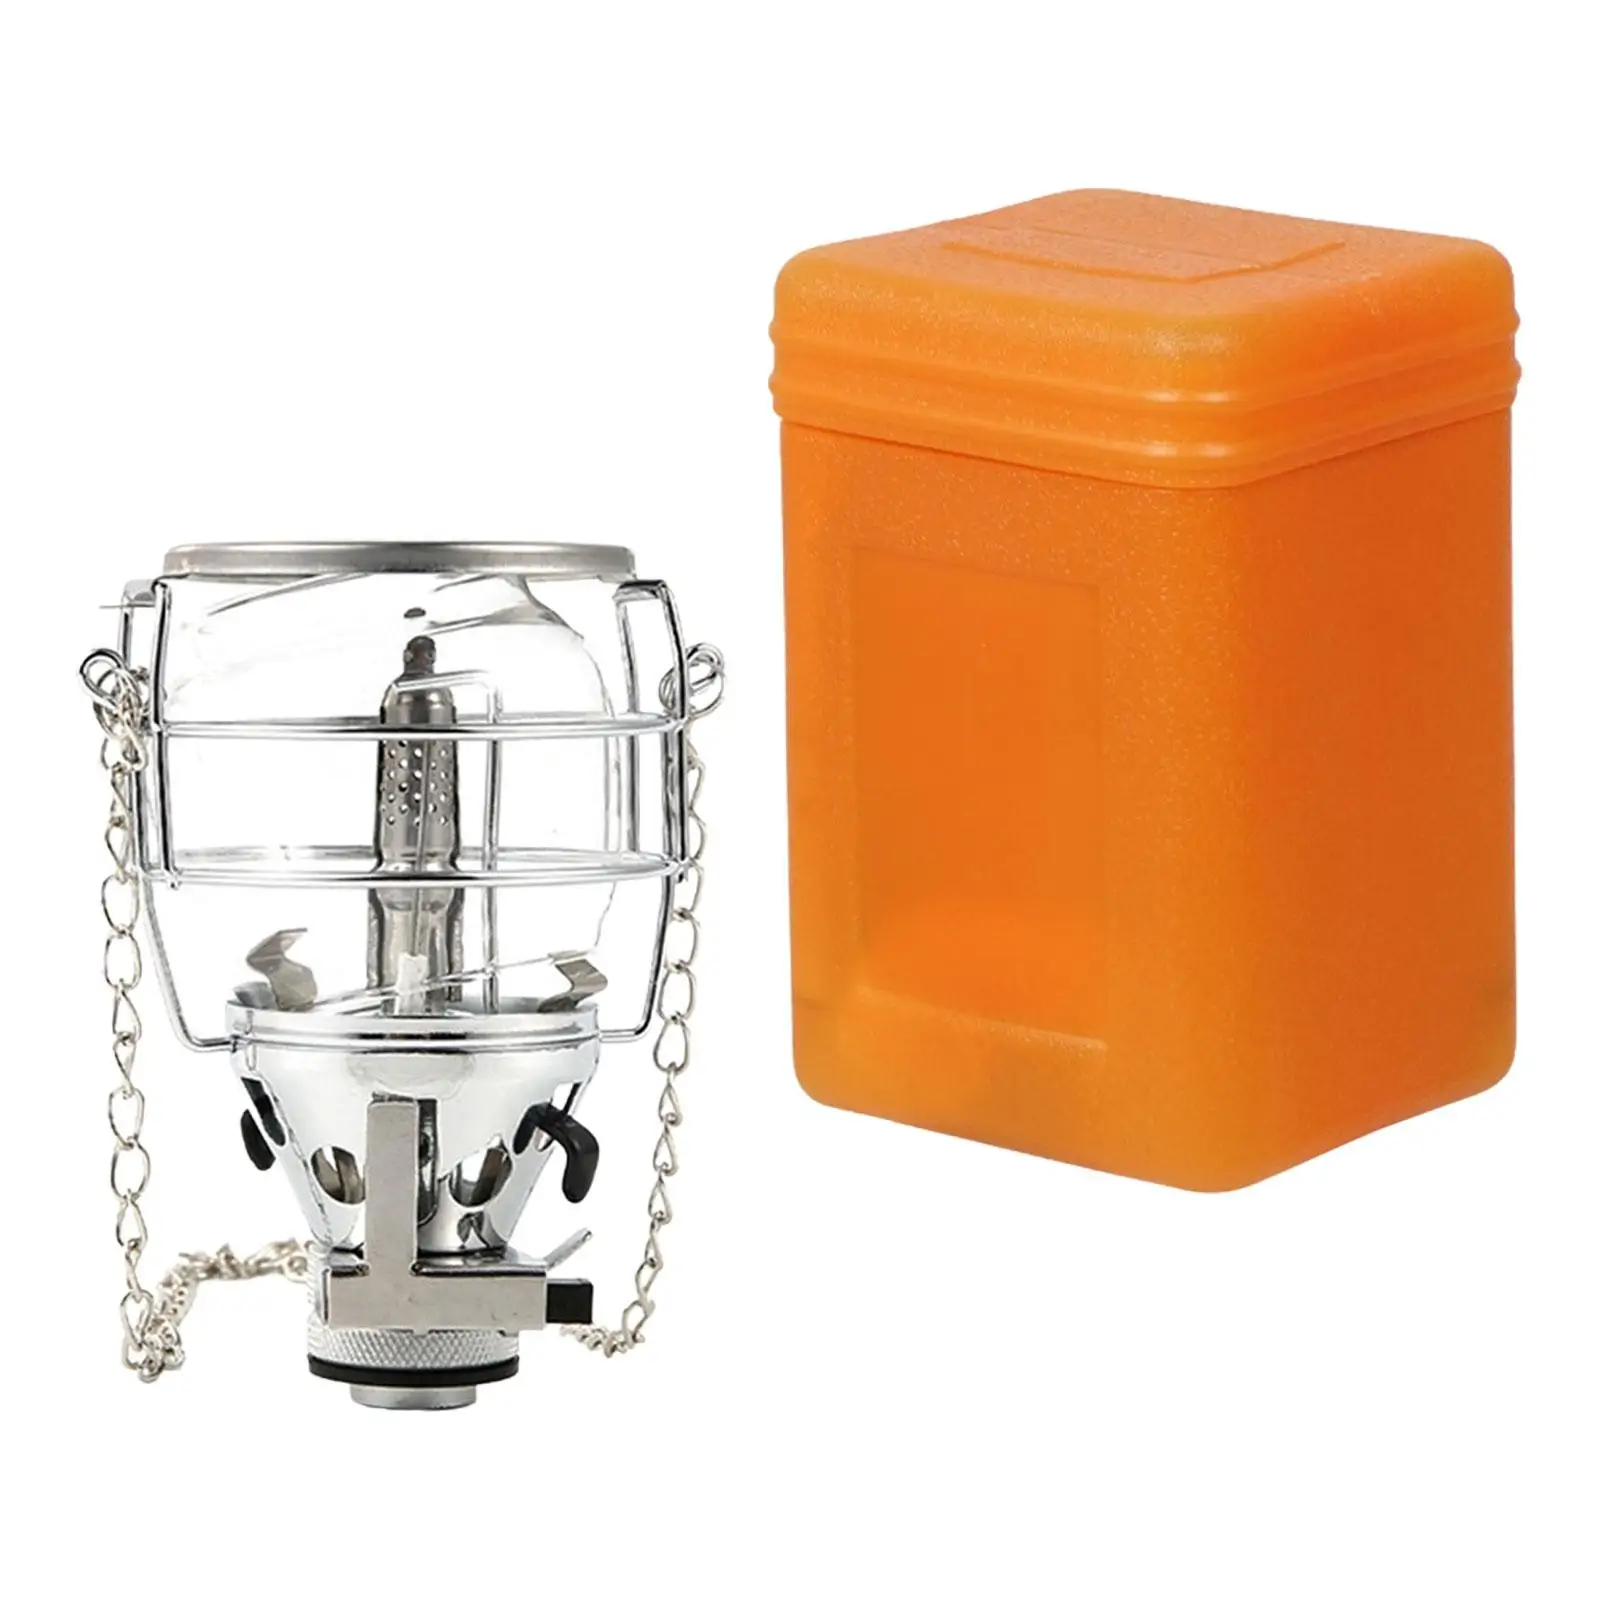 Compact Gas Lantern Fuel Lamp Lighting Gear with Storage Case Adjustable Hanging